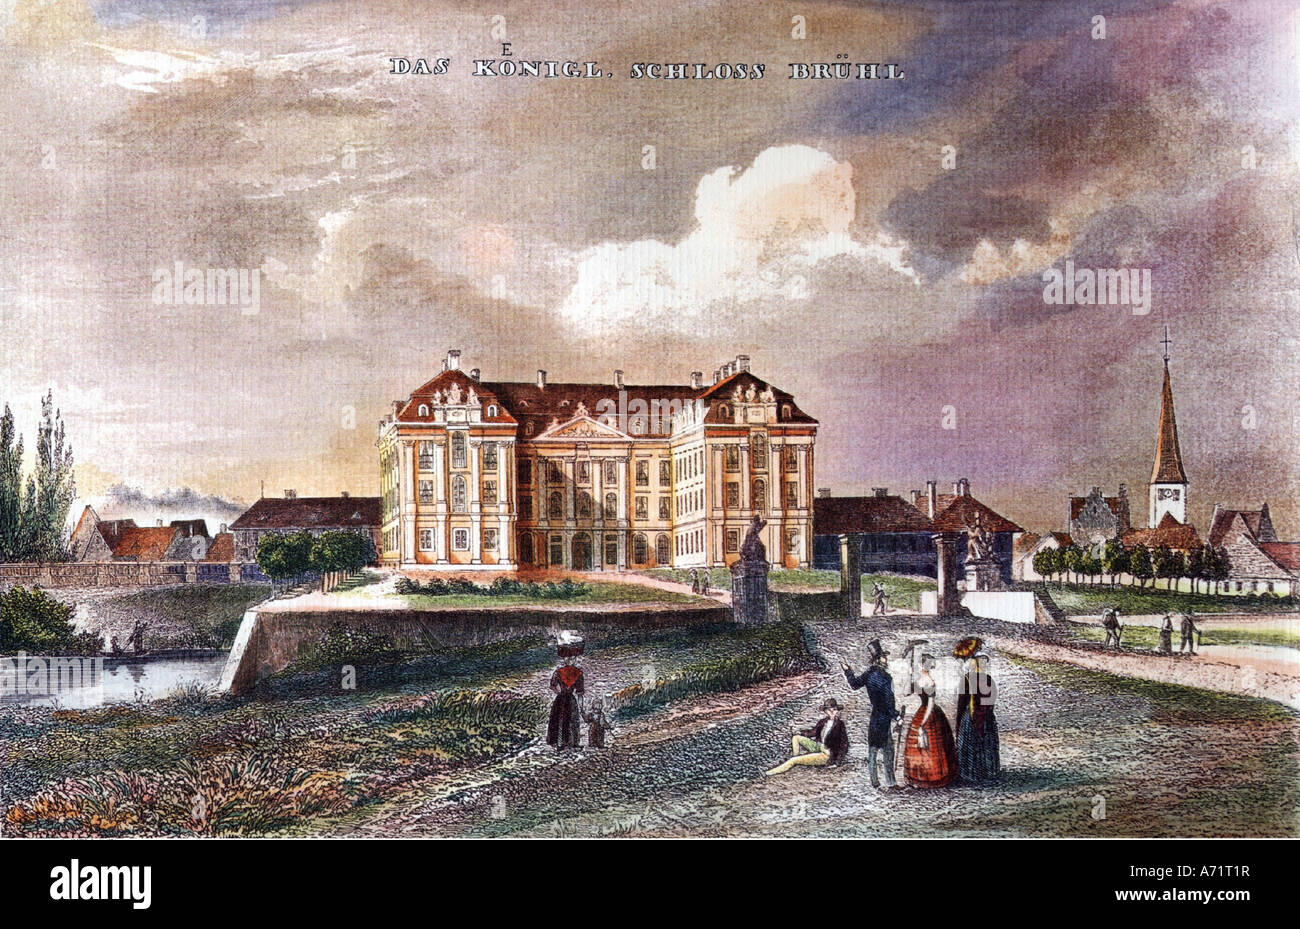 geography / travel, Germany, Brühl, castle Augustenburg, built 1288, redesigned 1725 - 1770, exterior view, coloured engraving by Georg Osterwald, 1841, historic, historical, 19th century, residence, Archbishop of cologne, renovation under Archbishop Clemens August von Bayern (Wittelsbach), architecture, later baroque, Rhineland, archbishopric, Bavaria, castles, Bruhl, Bruehl, Europe, UNESCO World Cultural Heritage Site, people, Stock Photo